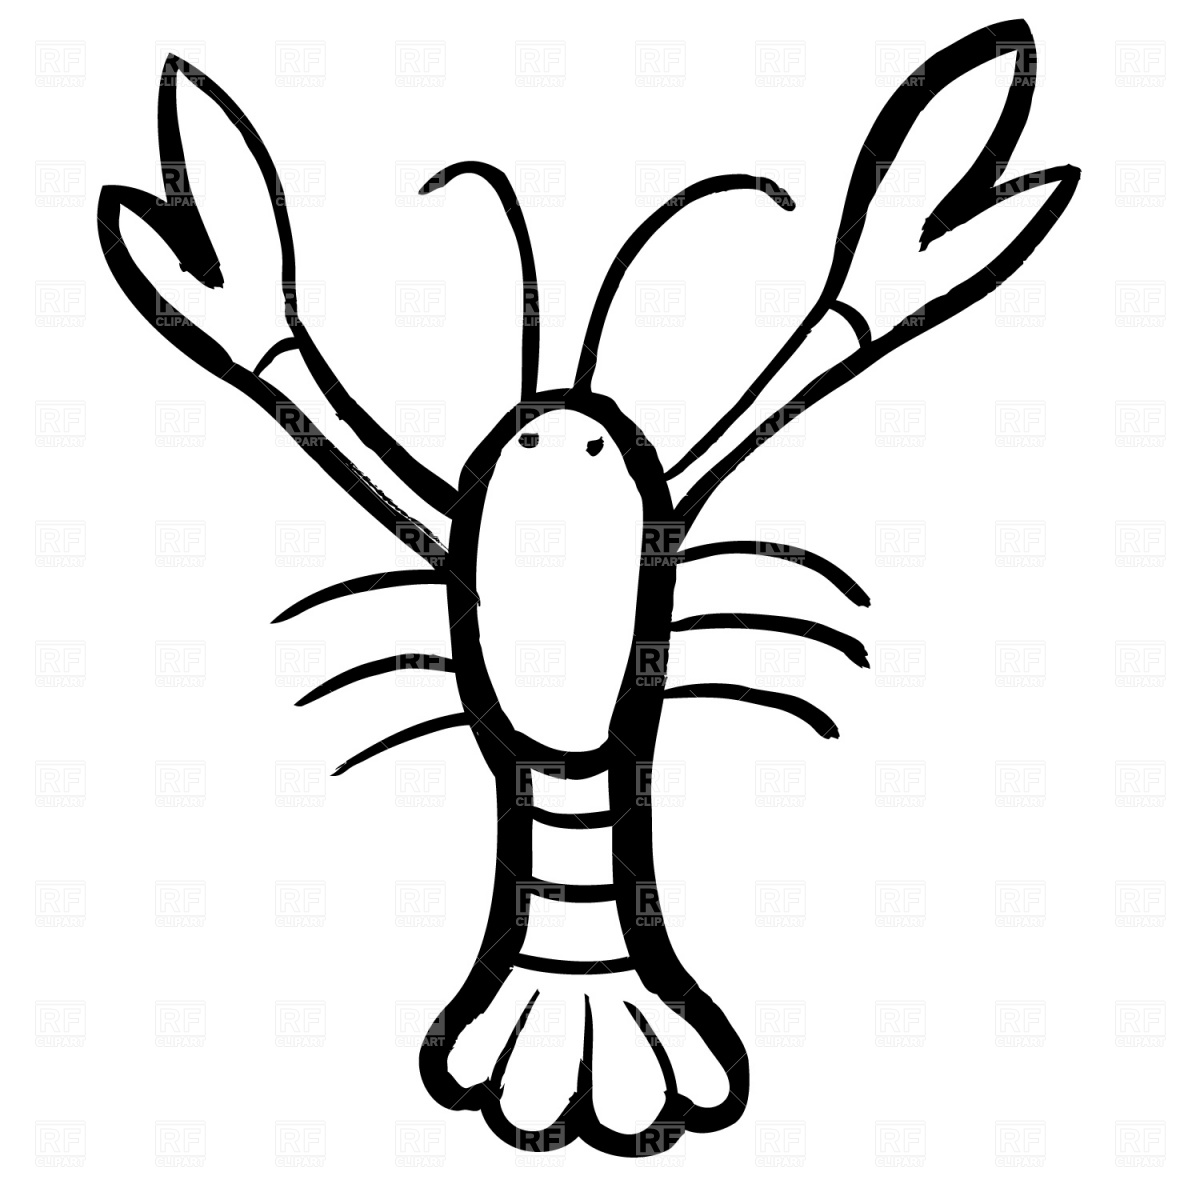 Clipart Catalog   Plants And Animals   Crayfish Download Royalty Free    